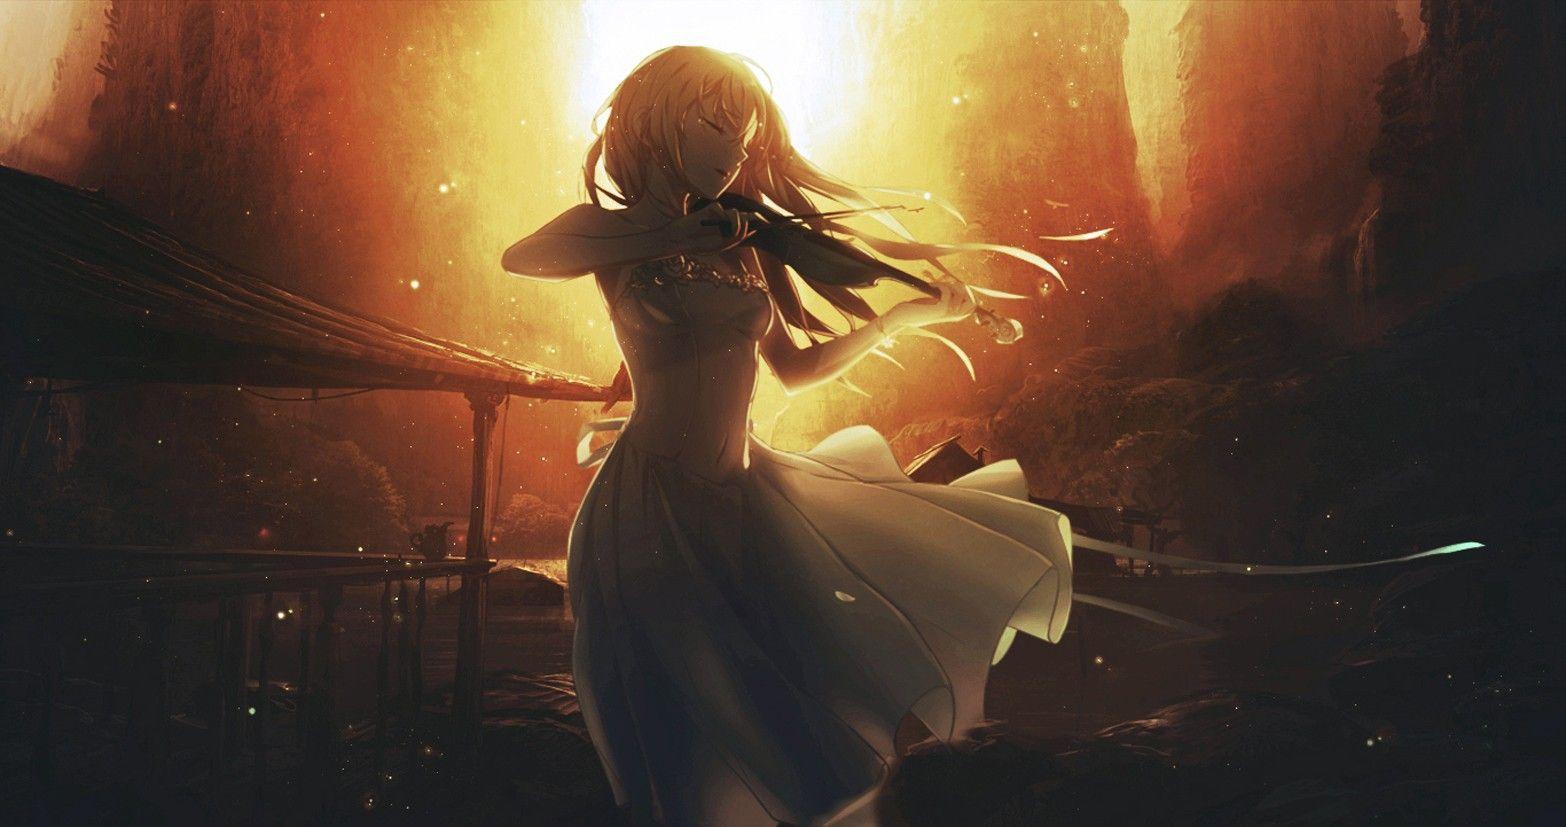 Your Lie In April Hd Wallpapers For Pc, Your Lie In April, Anime